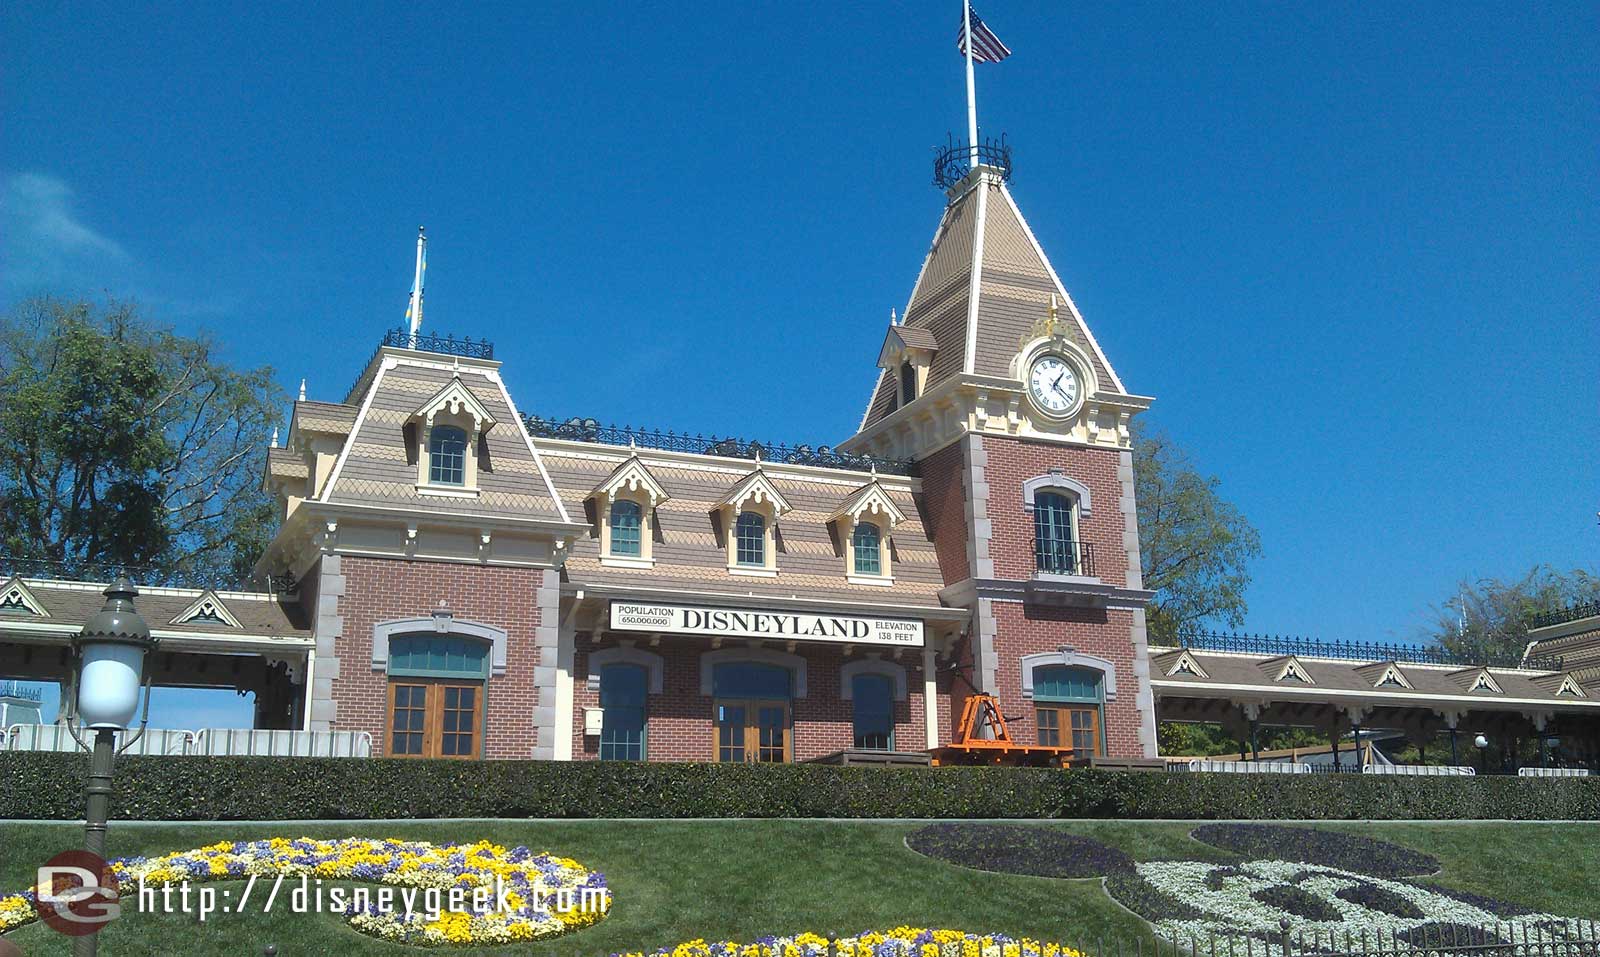 Just arrived at Disneyland for the afternoon. The Main Street train station scaffolding is down but not open